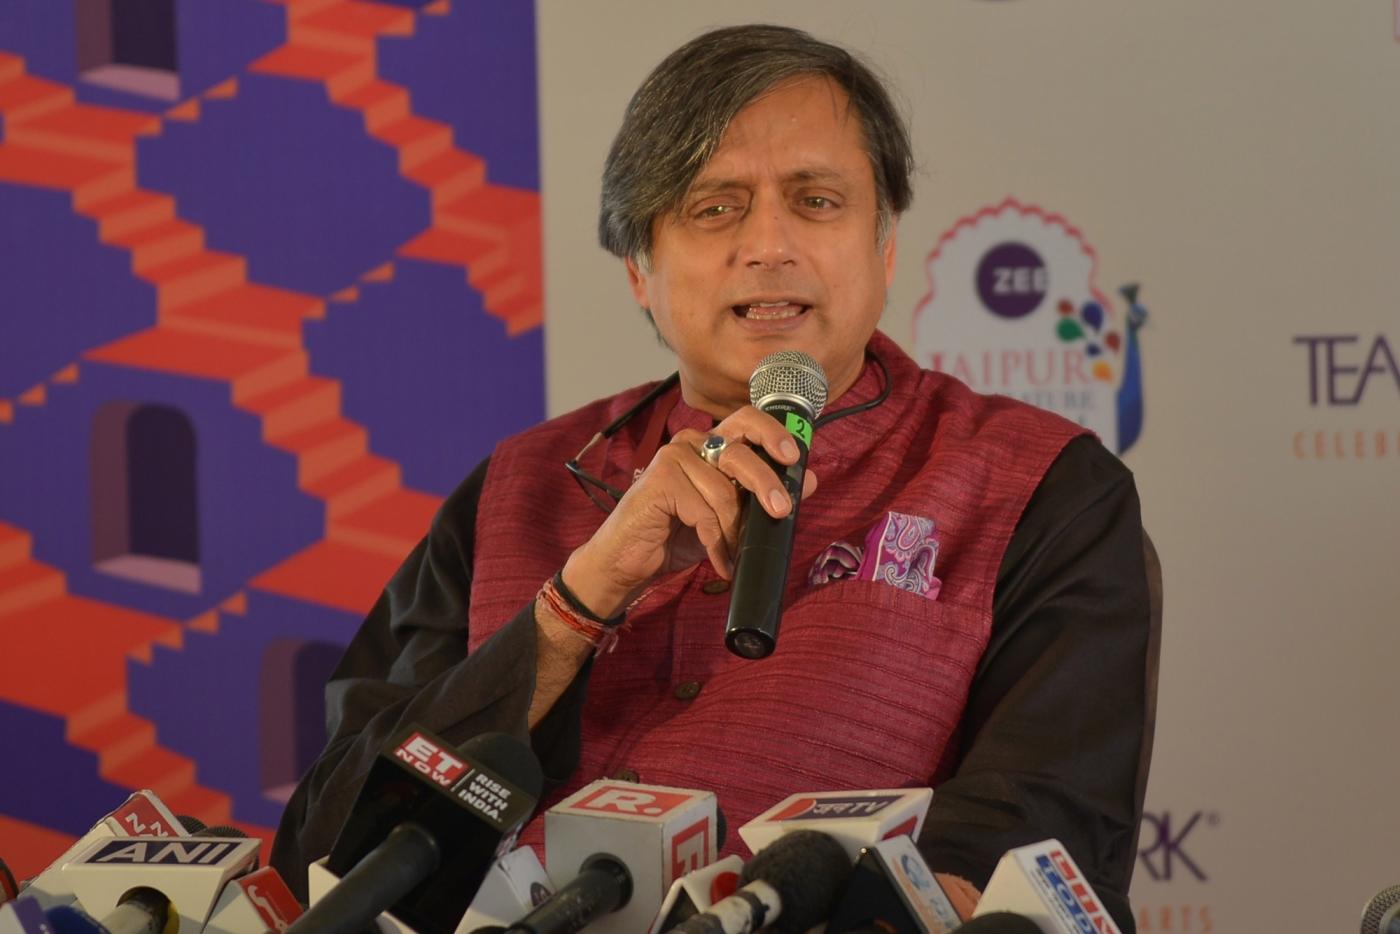 Jaipur: Congress MP Shashi Tharoor addresses during the 12th edition of Jaipur Literature Festival on Jan 25, 2019. (Photo: Shaukat Ahmed/IANS) by .